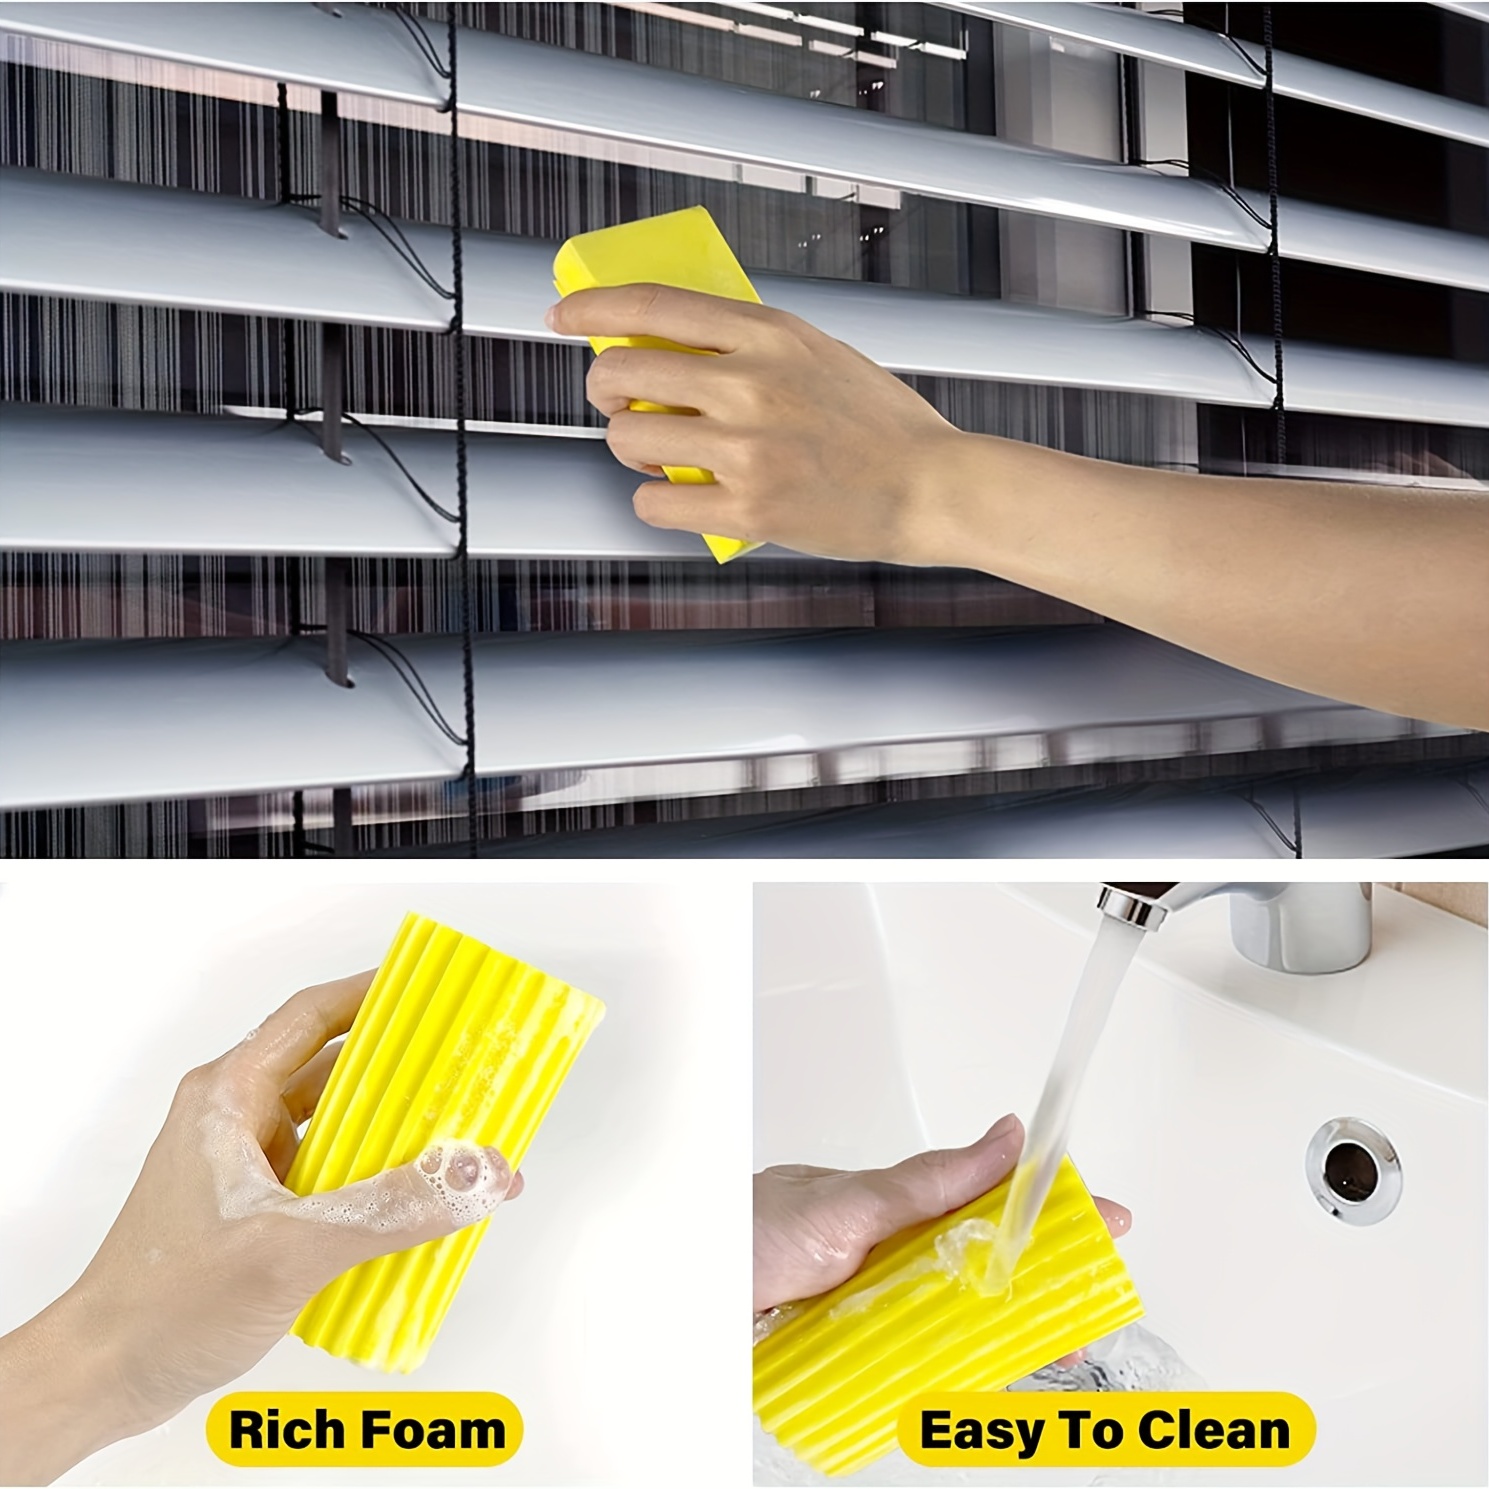 The damp duster is great for baseboards, glass, blinds, vents